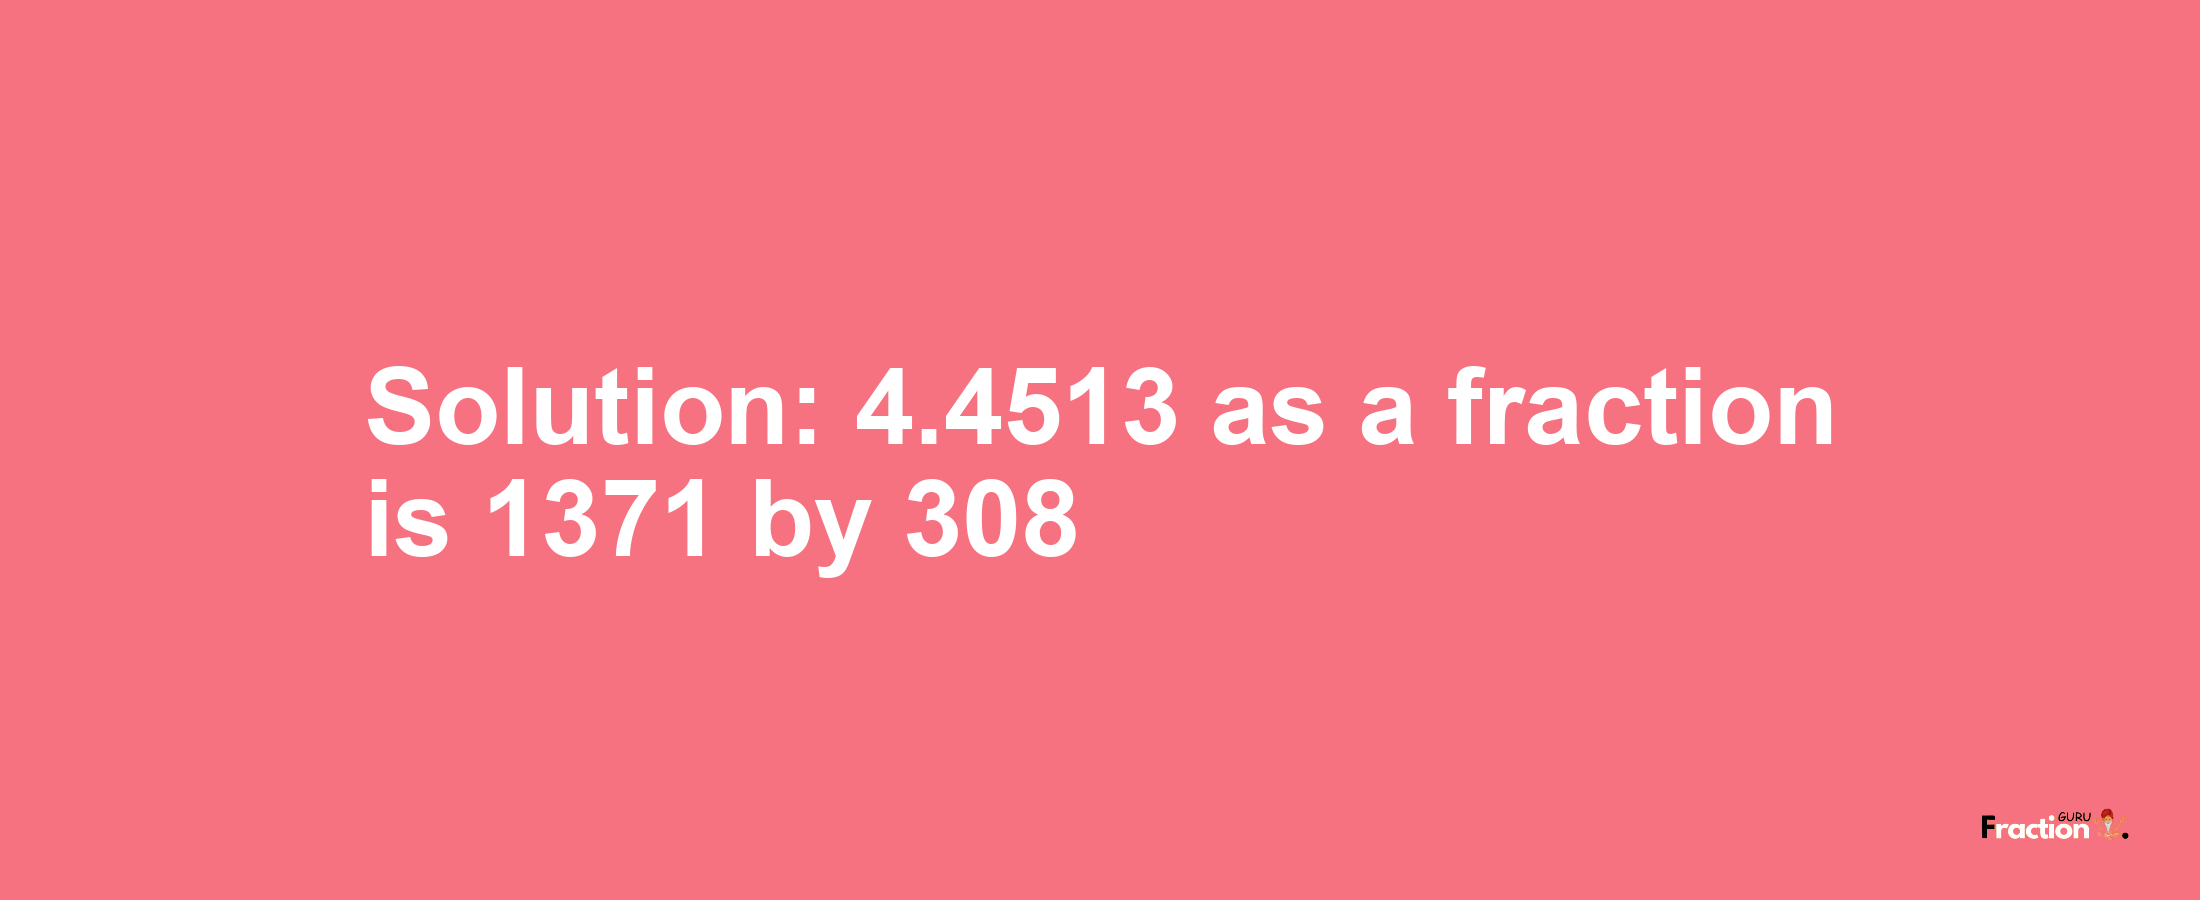 Solution:4.4513 as a fraction is 1371/308